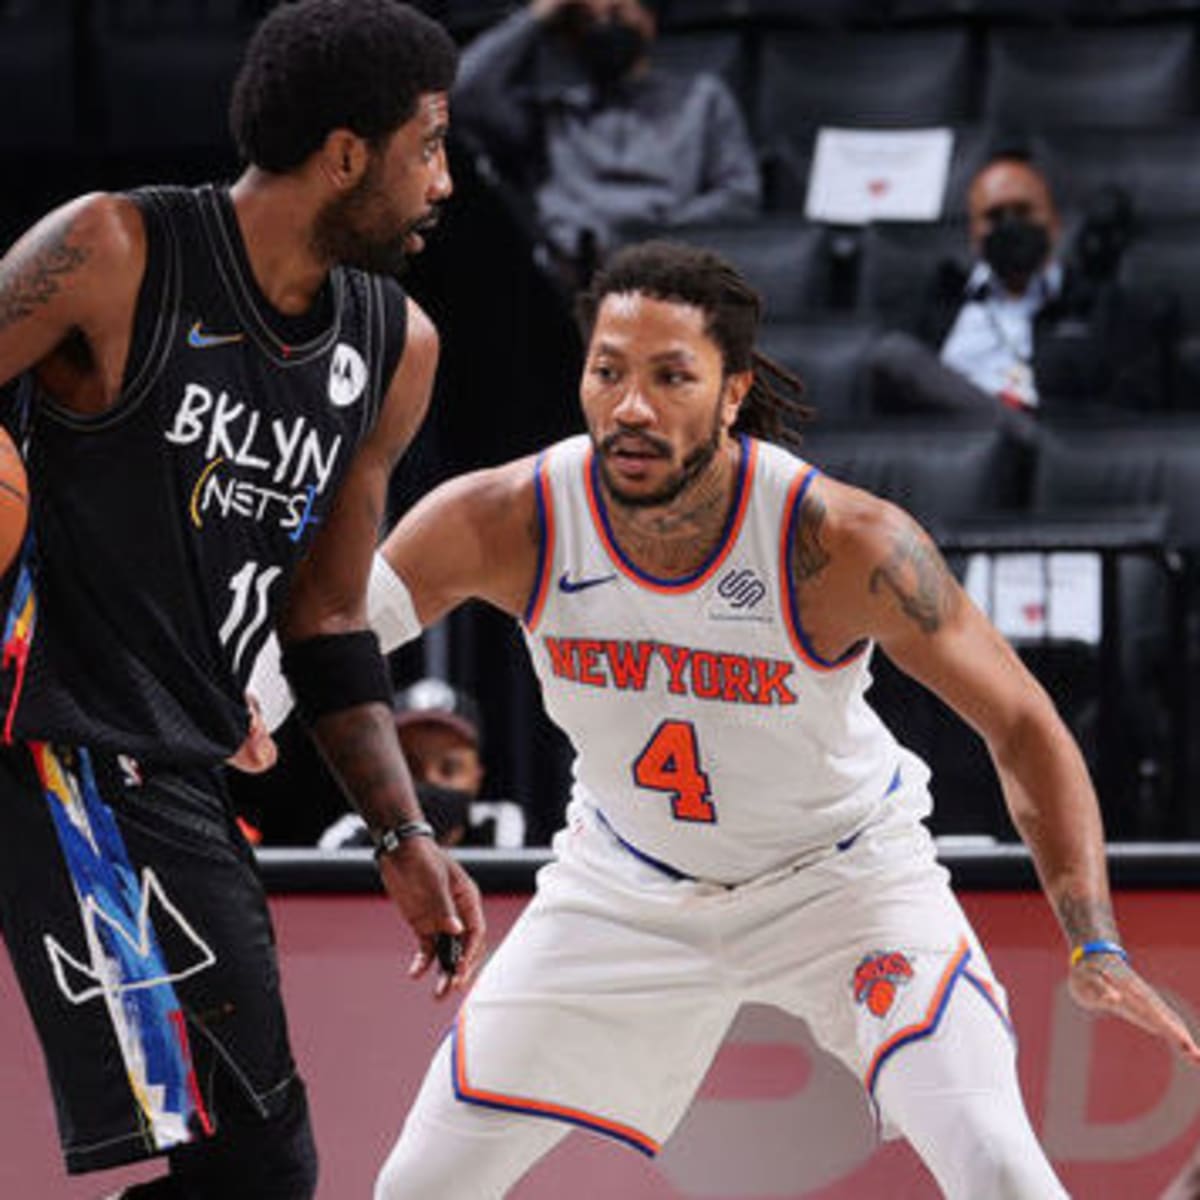 Top Moments: Derrick Rose becomes youngest player to win MVP